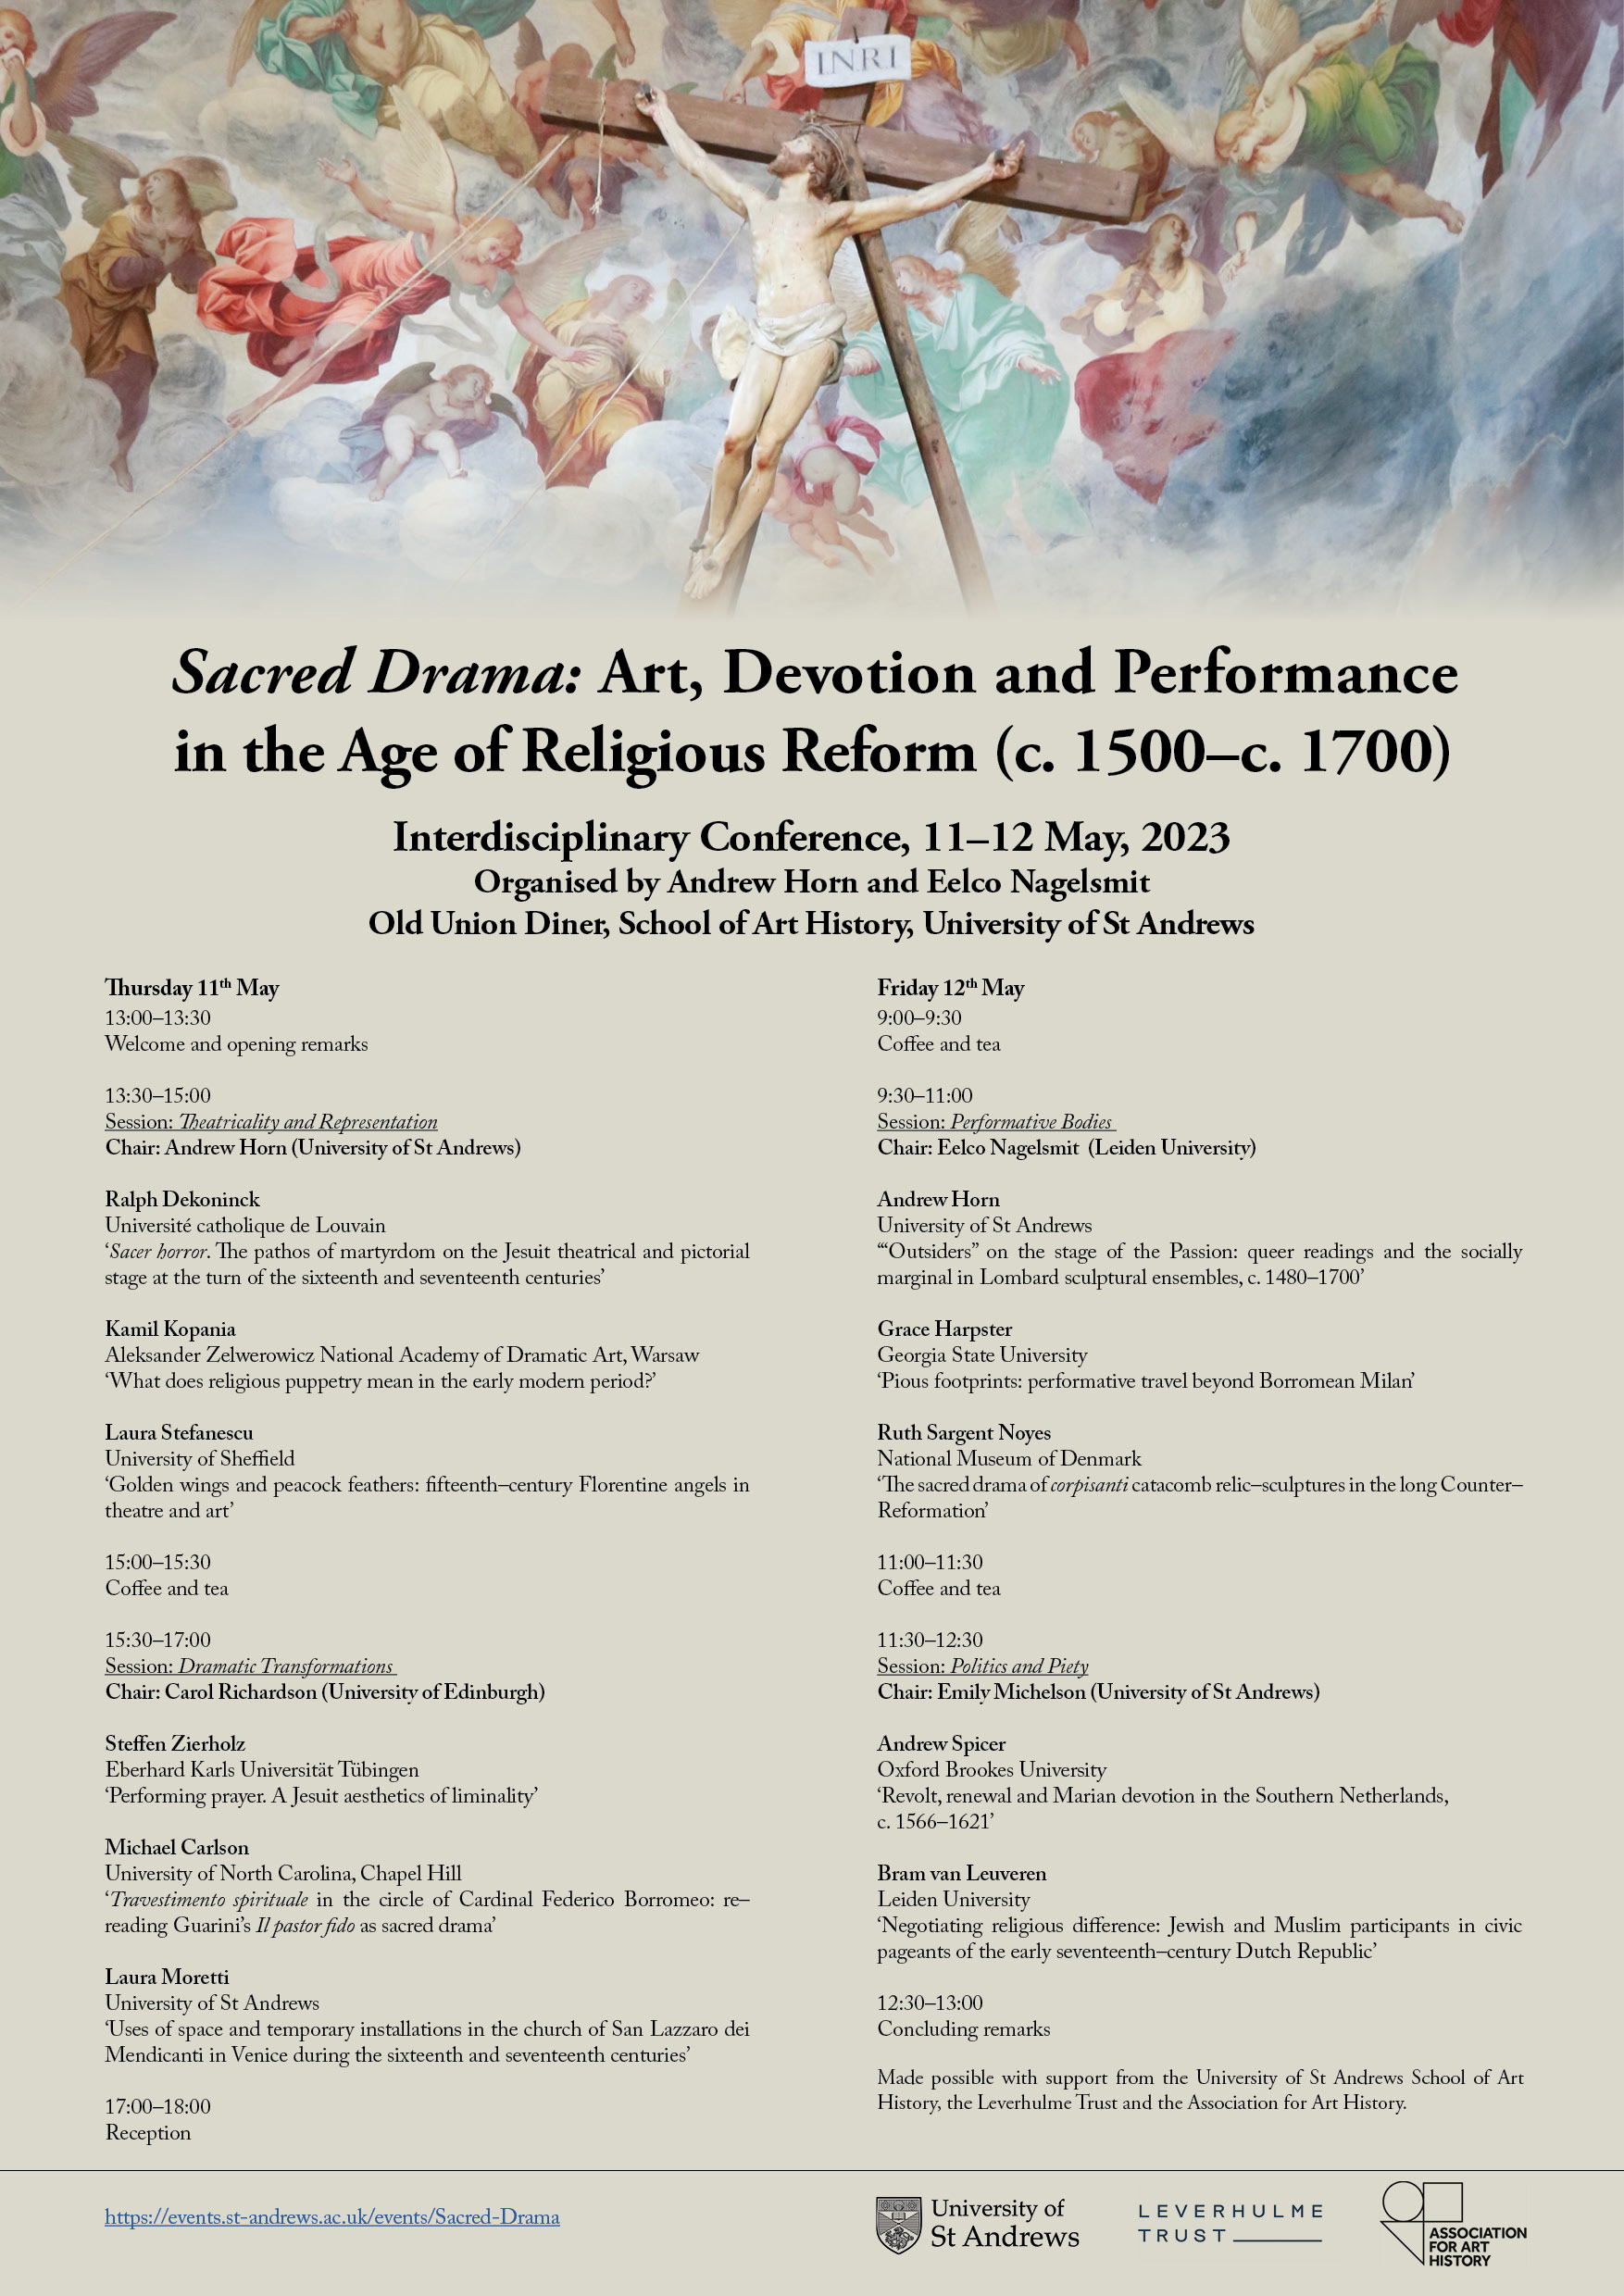 Sacred Drama: Art, Devotion and Performance in the Age of Religious Reform (c.1500 - c.1700) poster